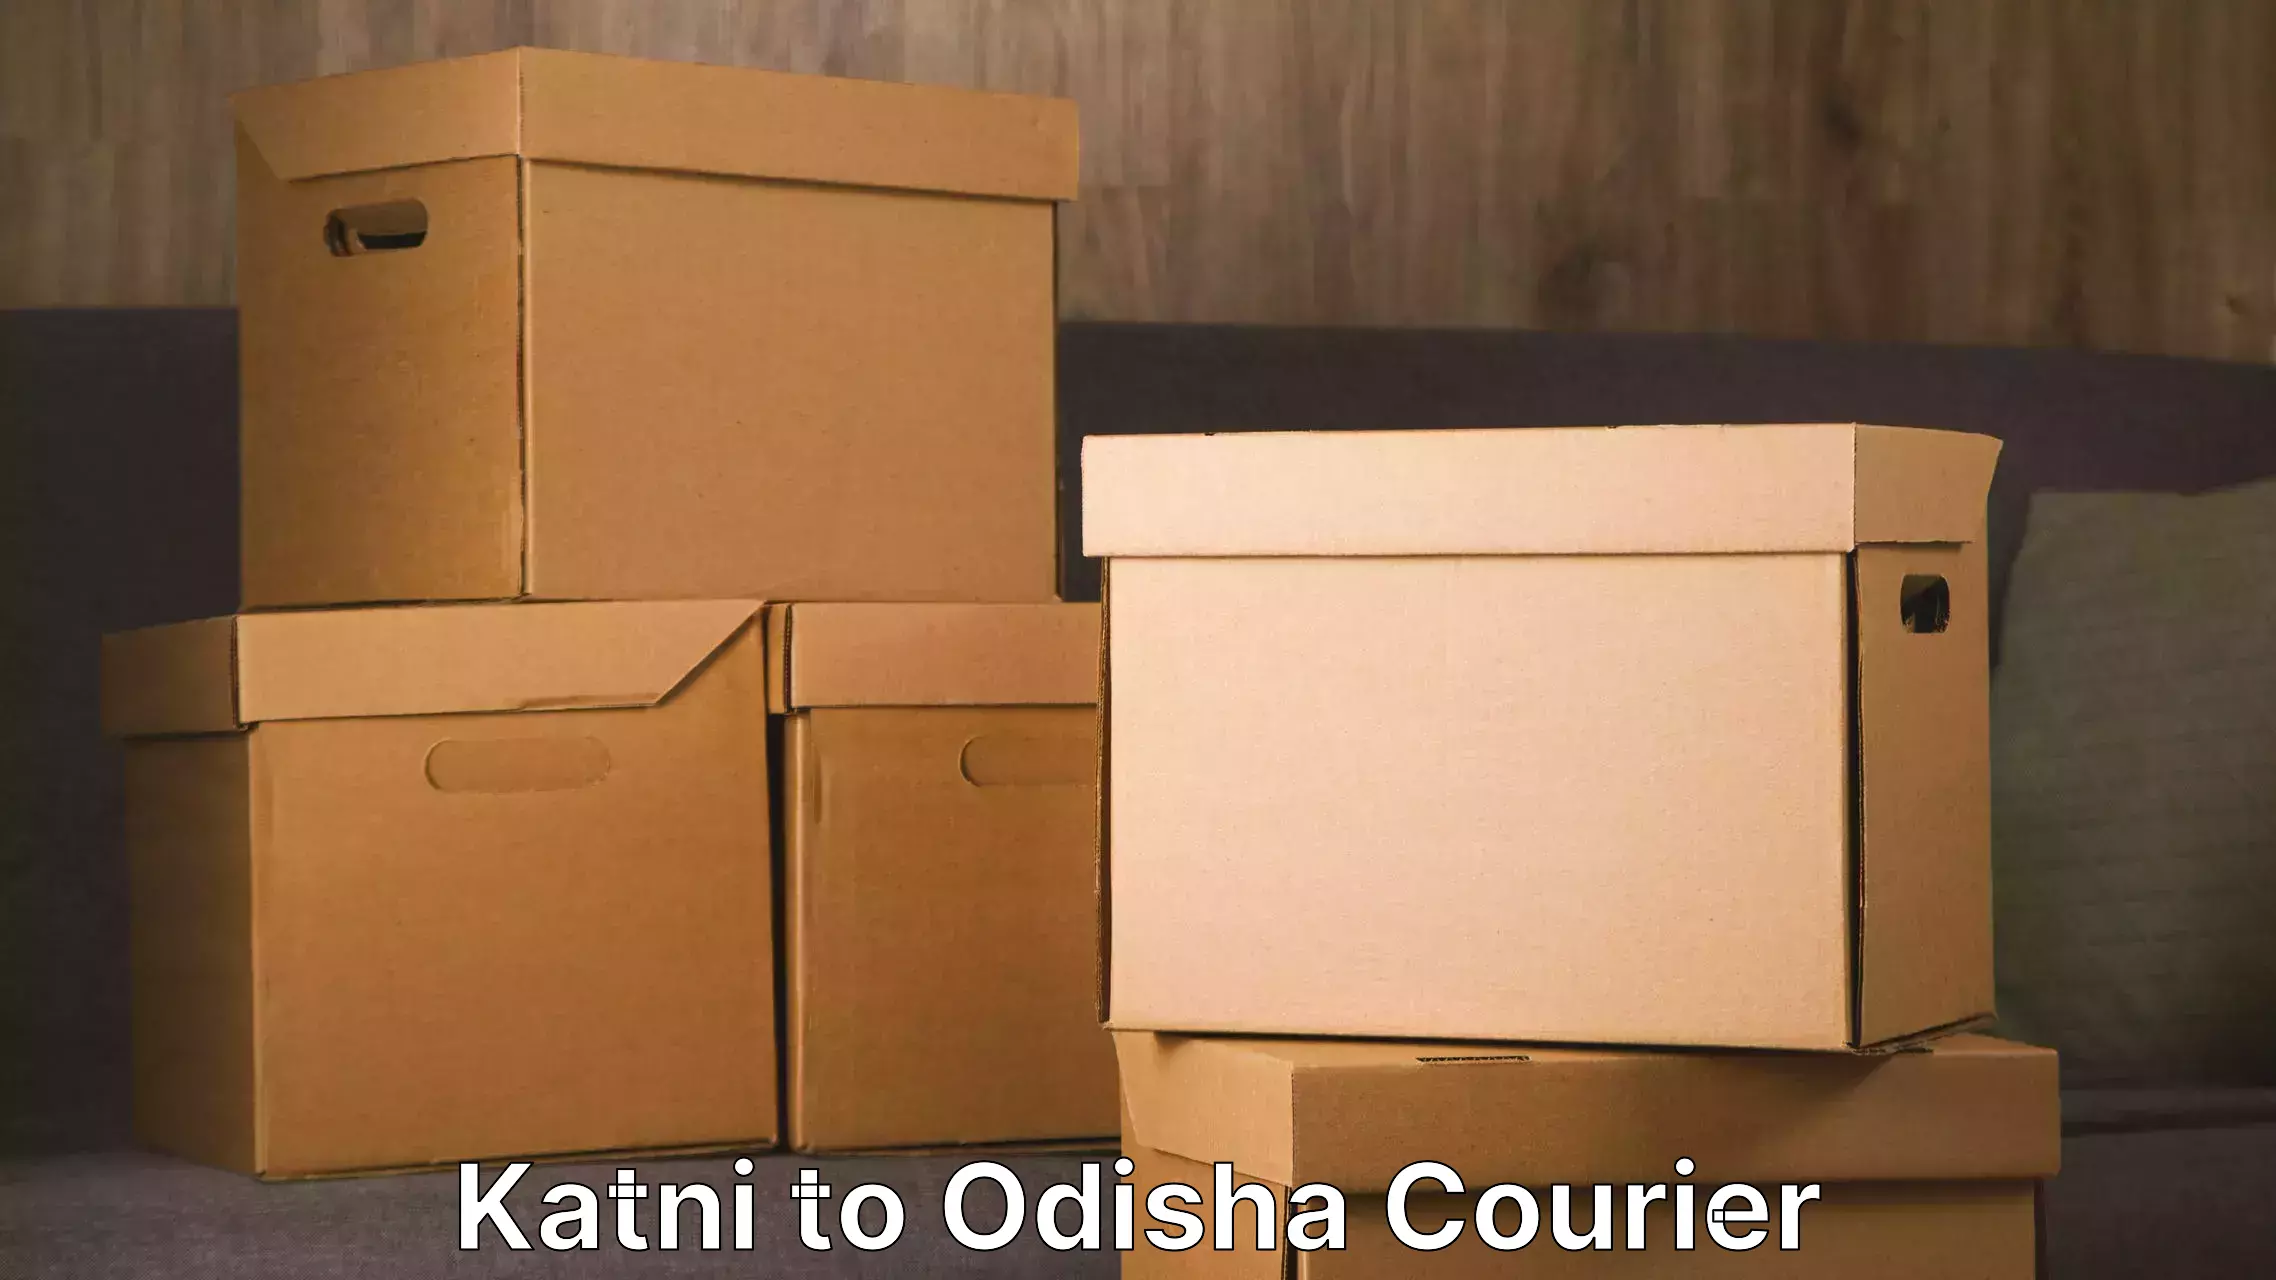 Trusted relocation experts Katni to Bissam Cuttack